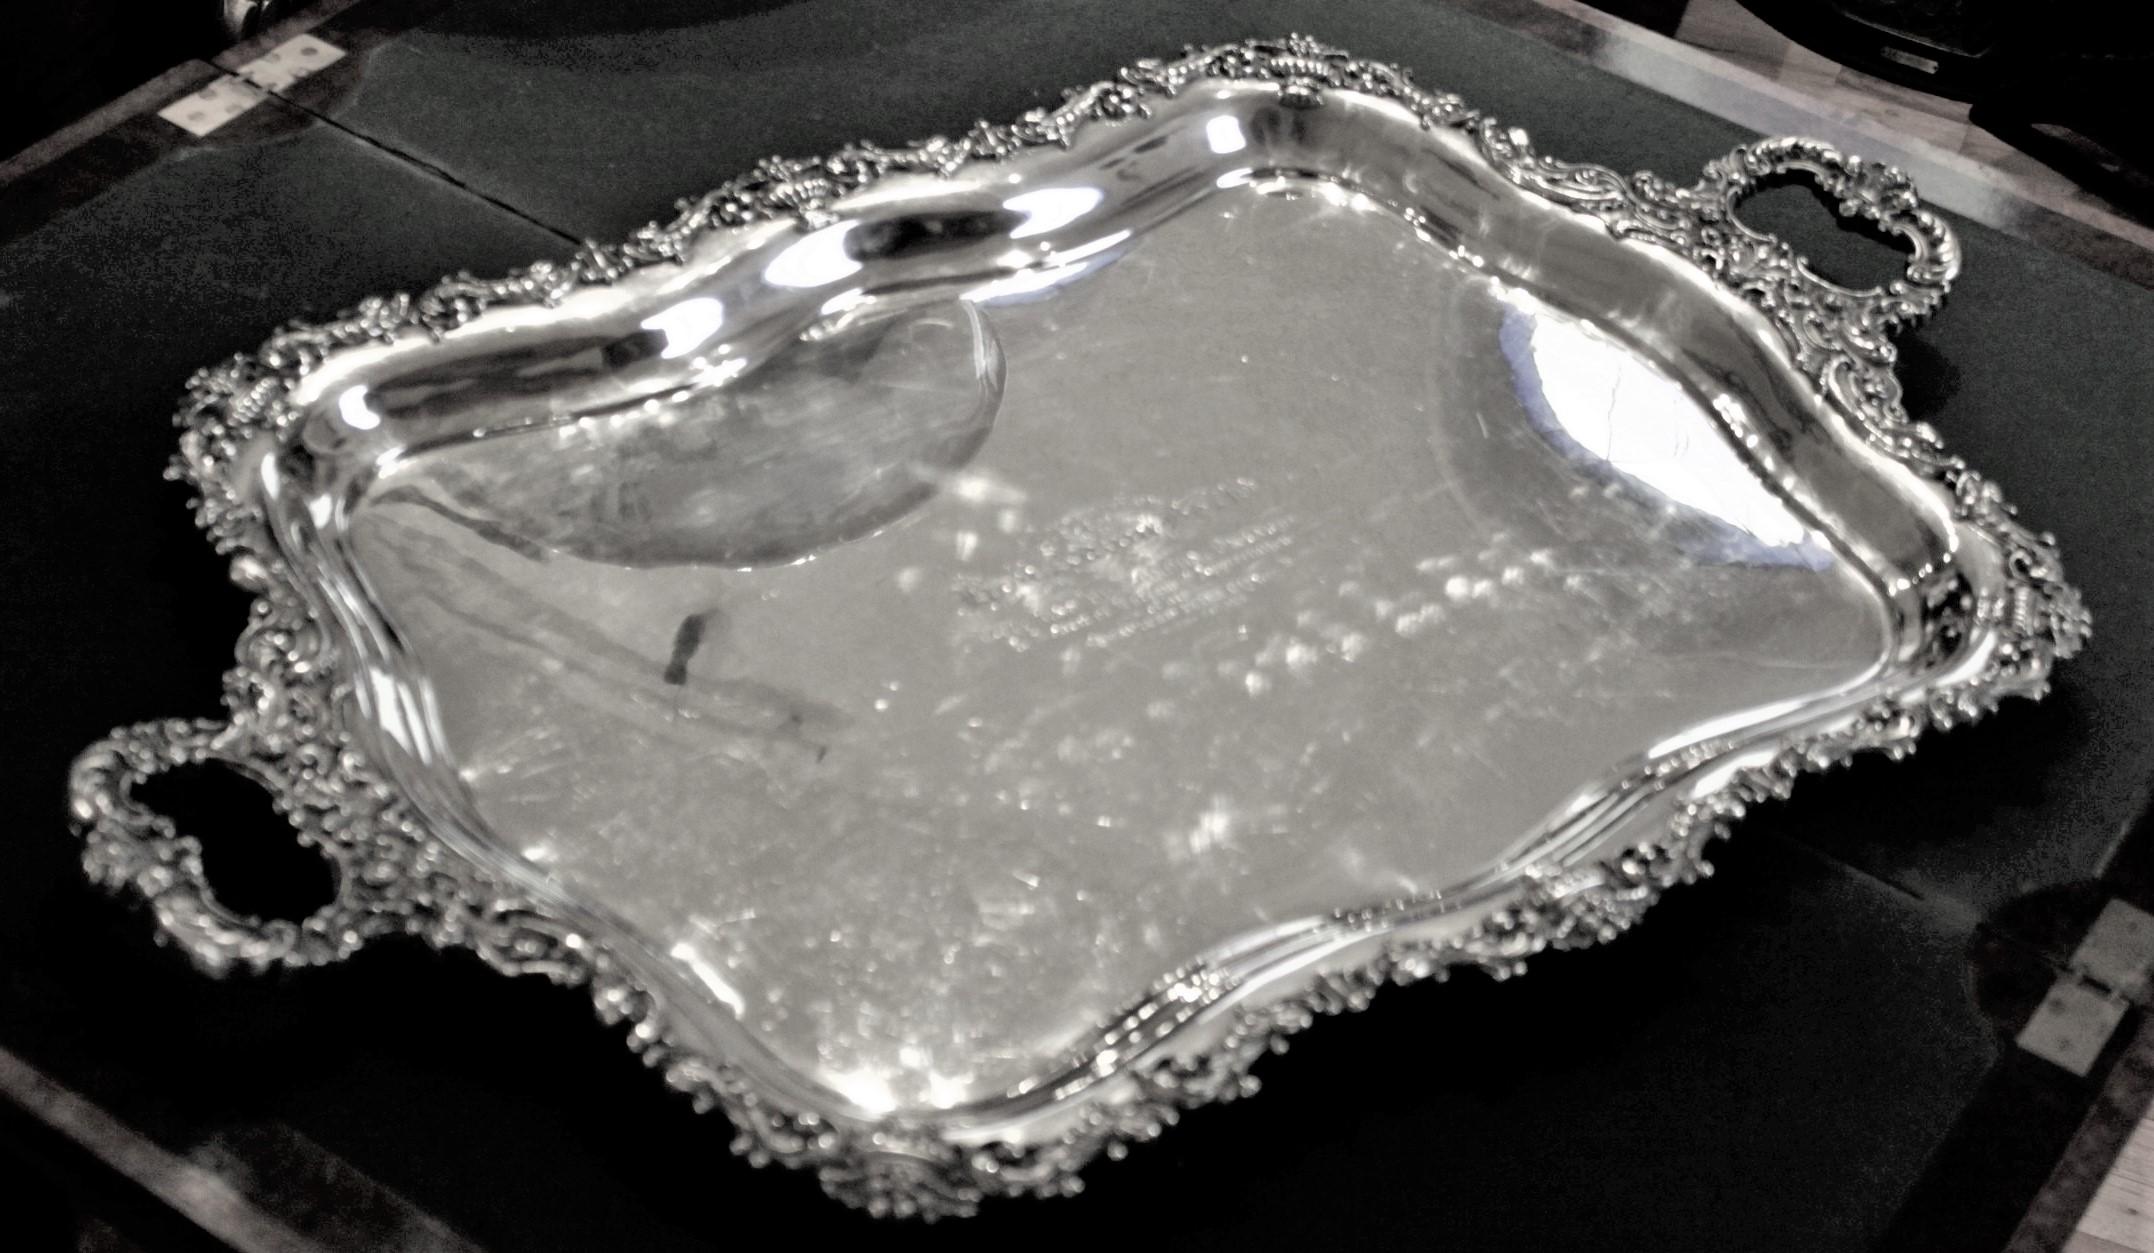 This very large and substantial sterling silver serving tray was made by Meridian Silver Company of Canada in circa 1914 in a Rococo Revival style. This tray was presented to the Hon. Adam Beck by the City of London, Ontario Canada for his 